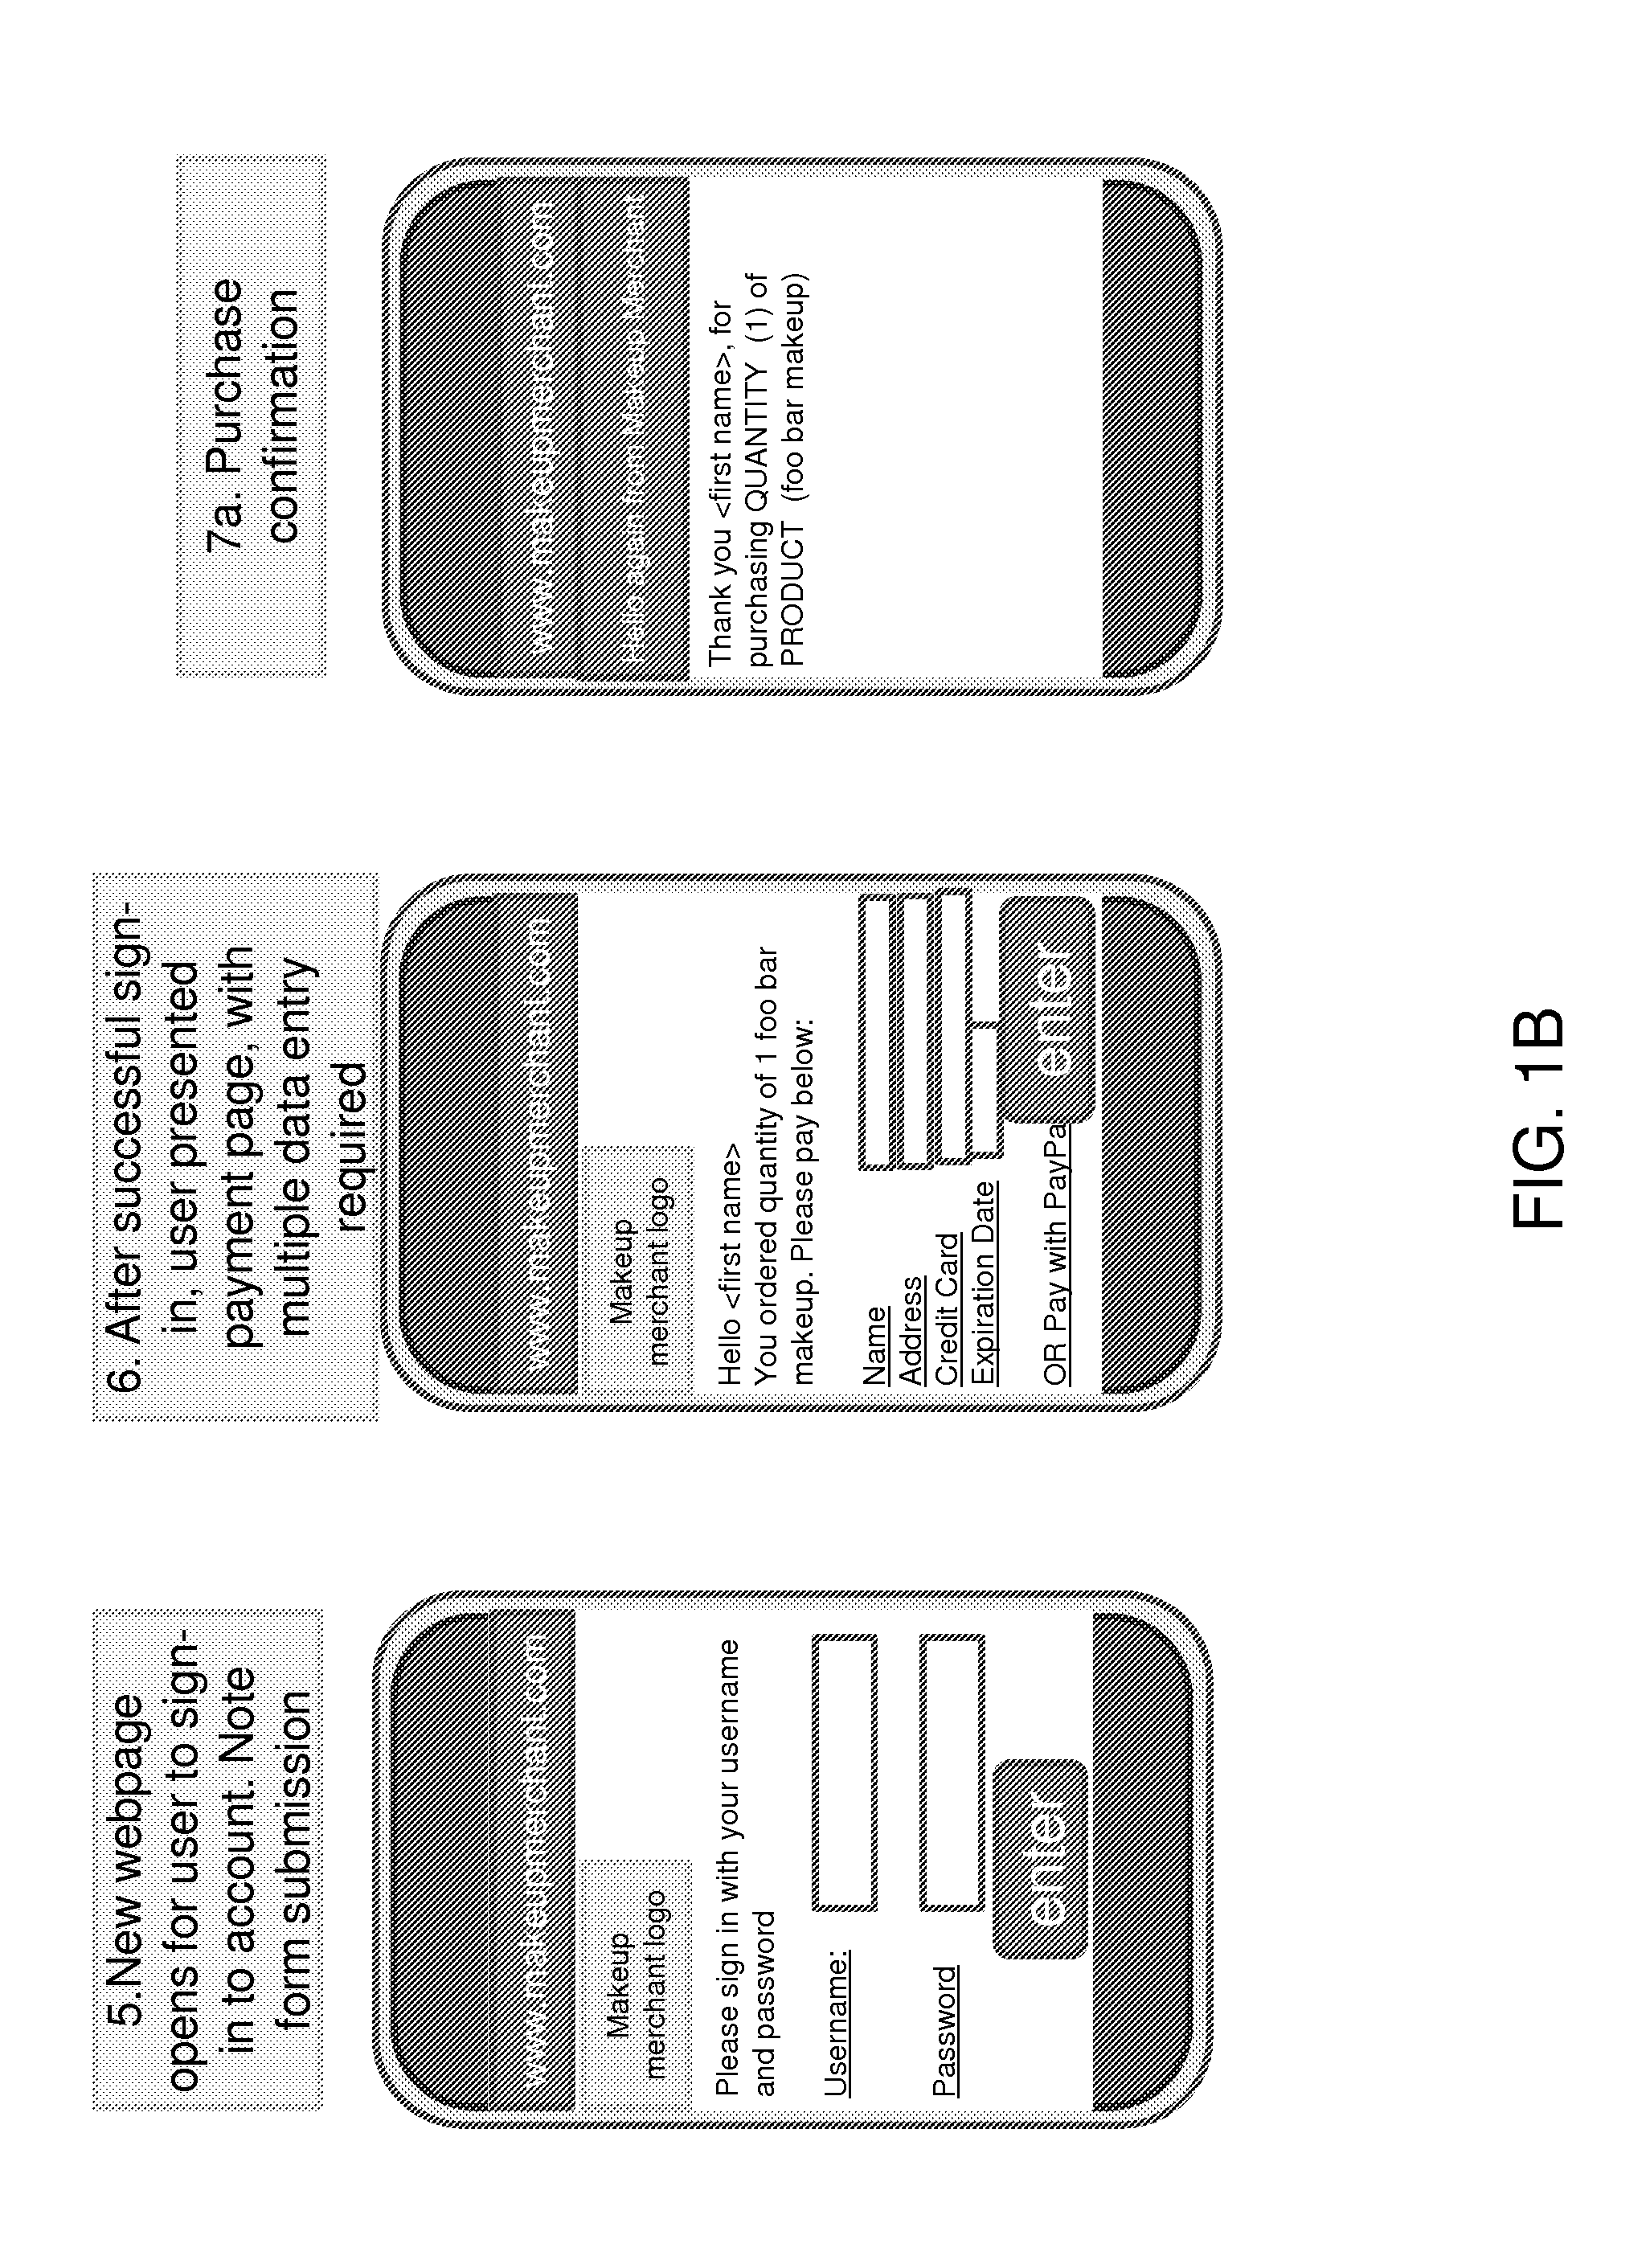 System, method, and computer program product for Data Entry Free electronic purchasing